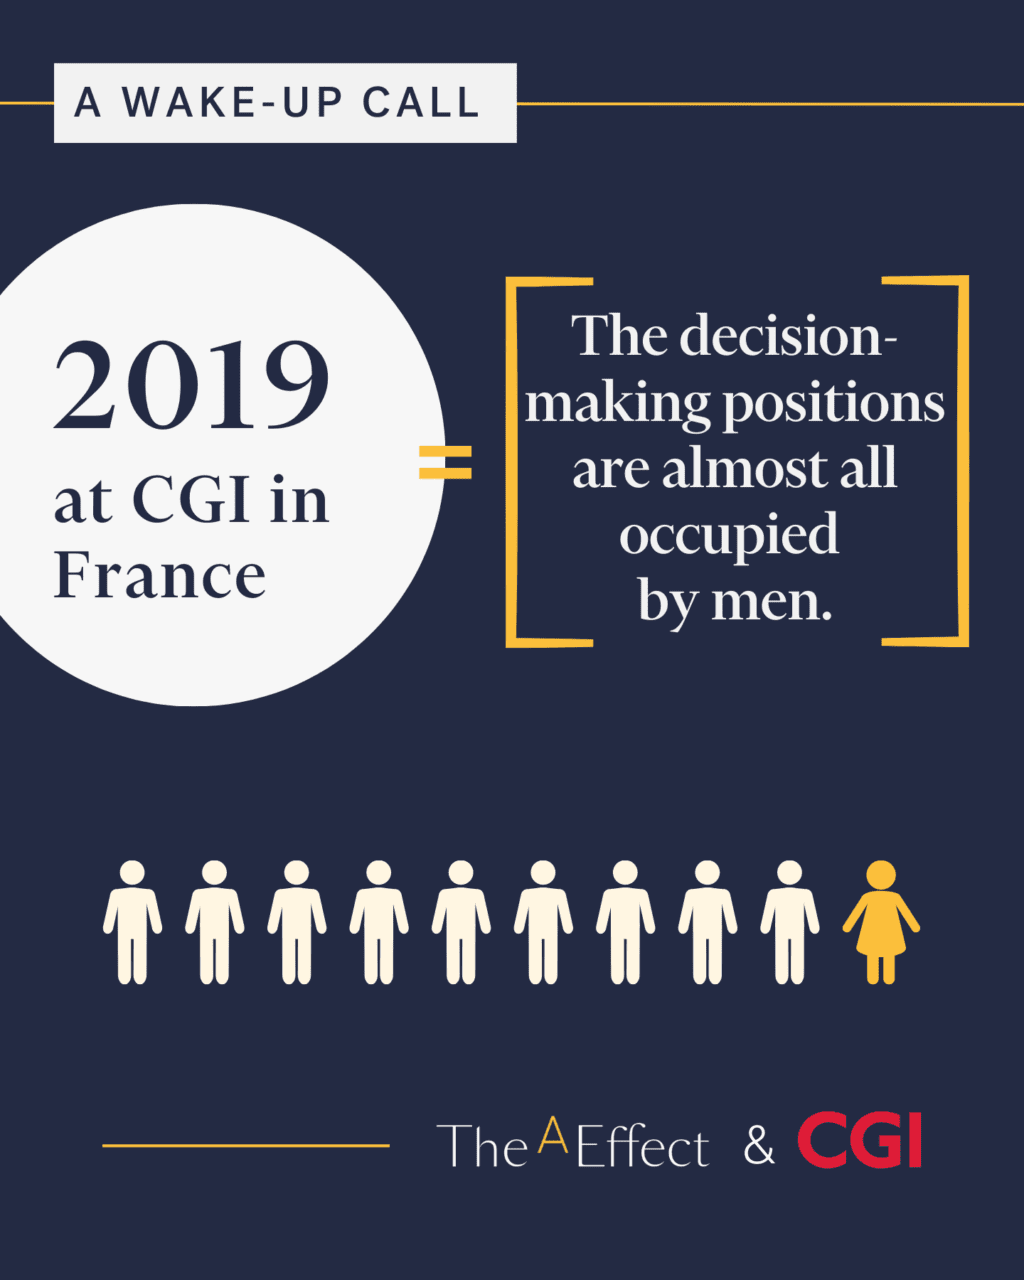 In 2019 at CGI in France, the decision-making positions are almost all occupied by men.